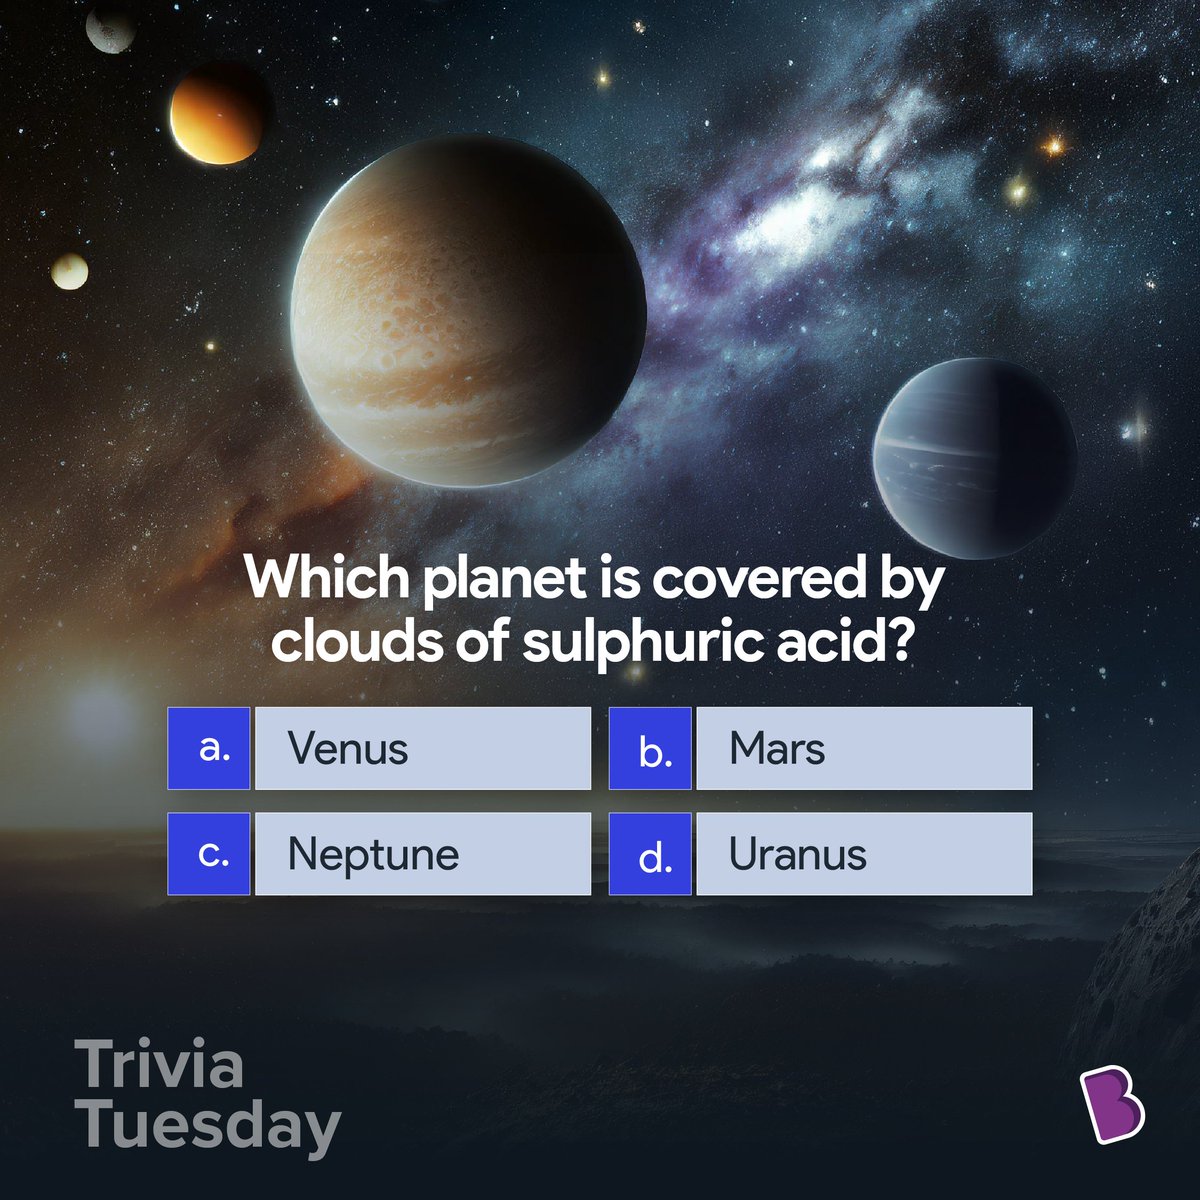 Unmask the mystery: Which planet hides its surface under a veil of acid clouds? #TriviaTuesday #trivia #byjus #byjuslearning #byjusthelearningapp #curiosity #enhanceyourpotential